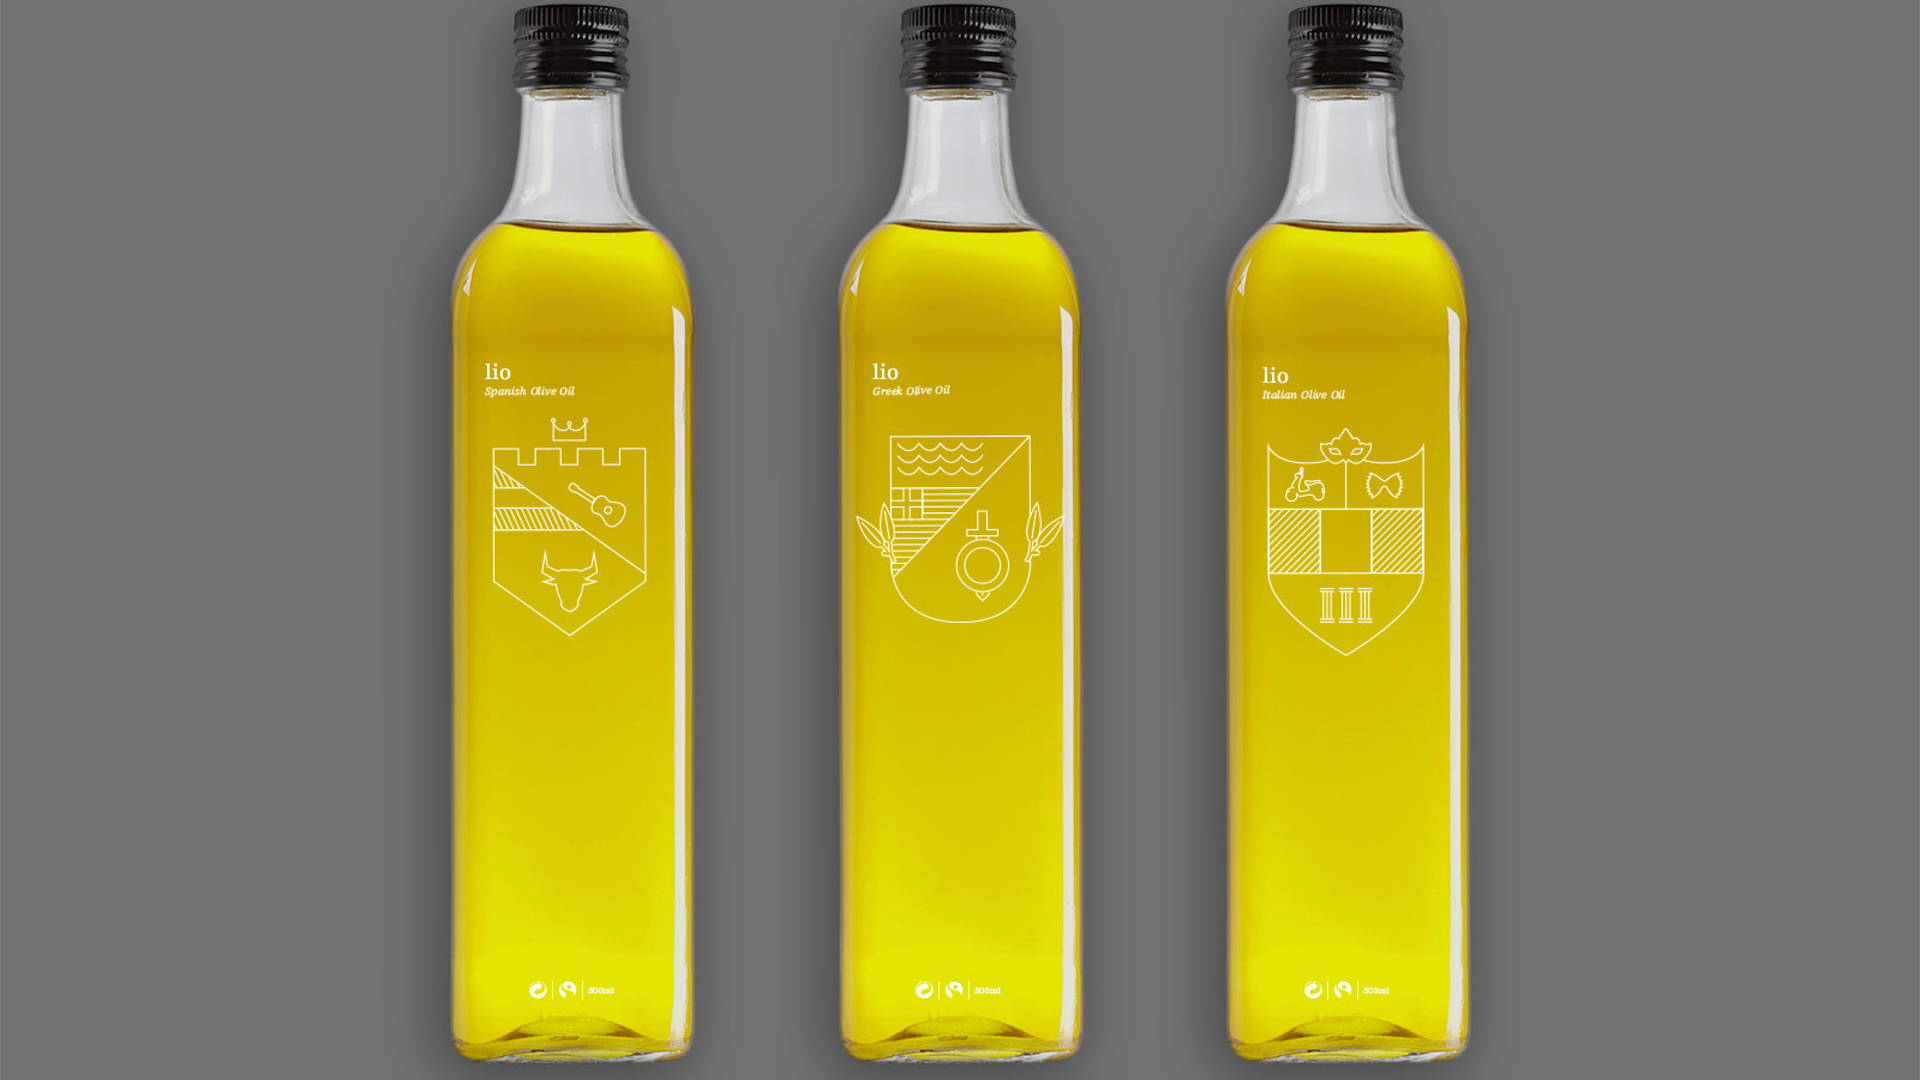 Featured image for Lio Olive Oil